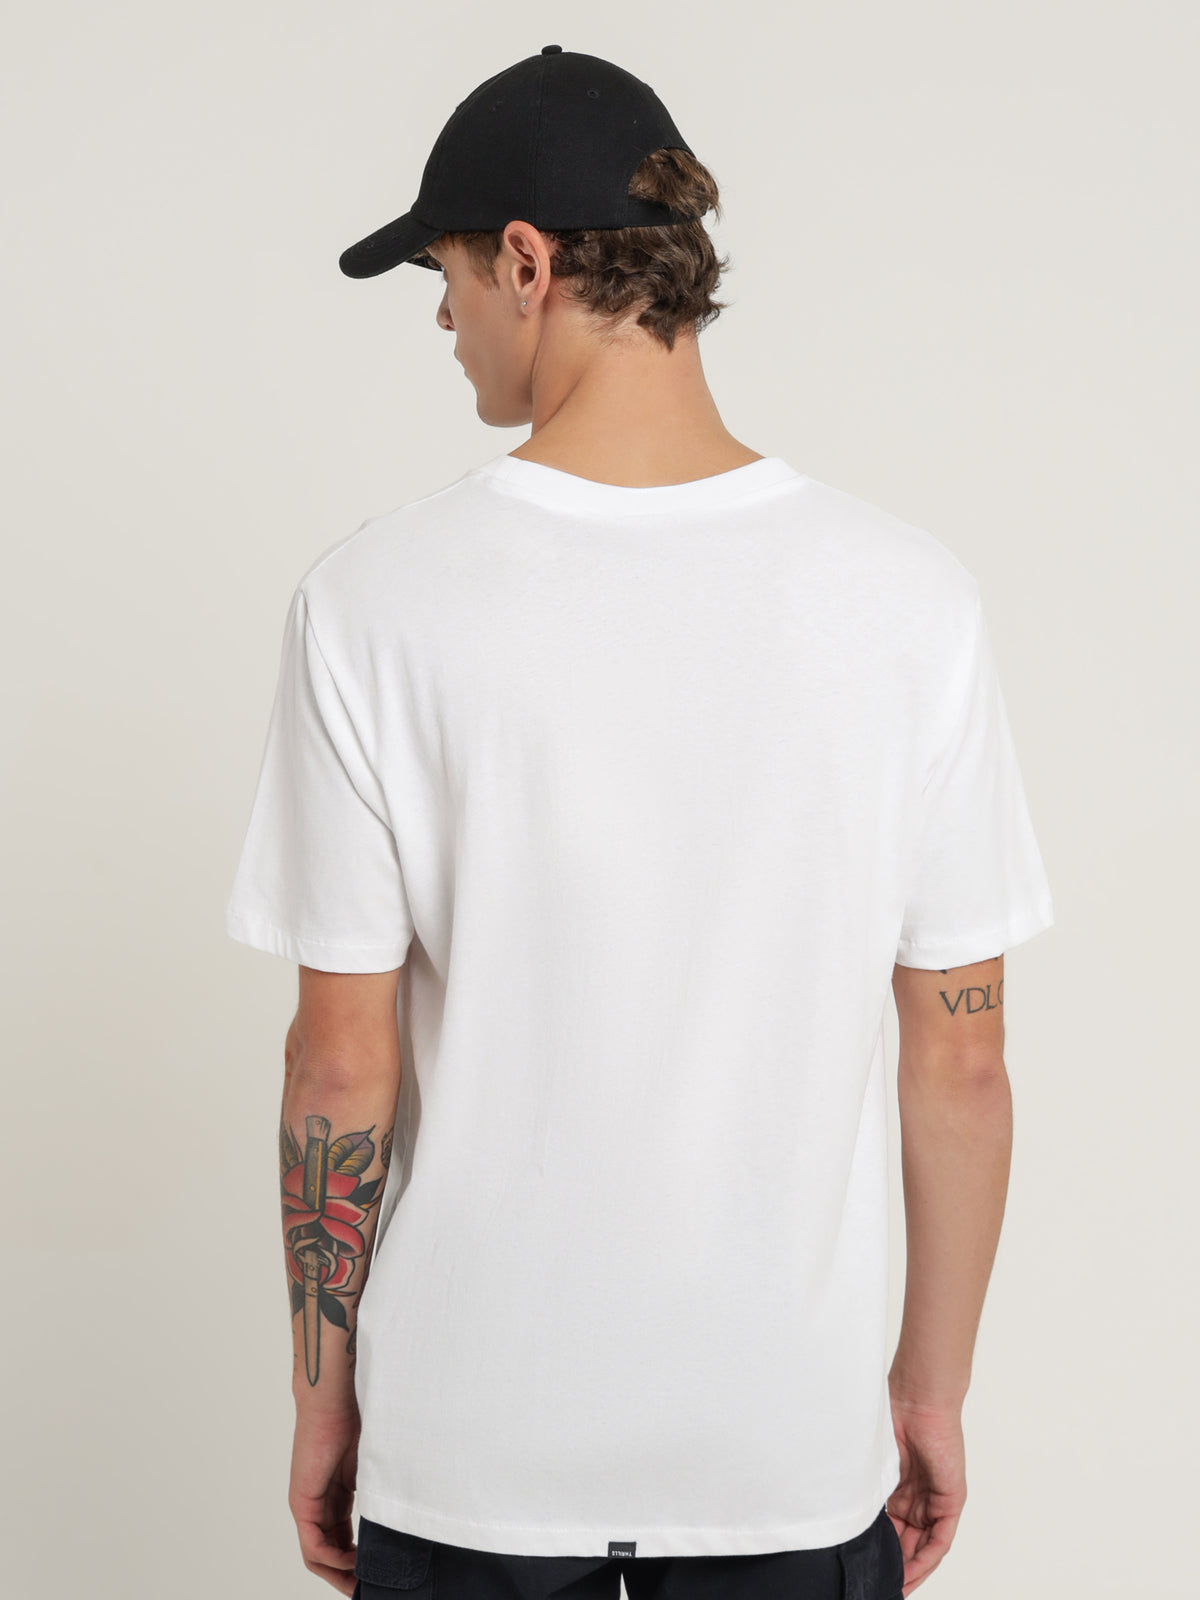 In Order And Disorder Merch Fit T-Shirt in White